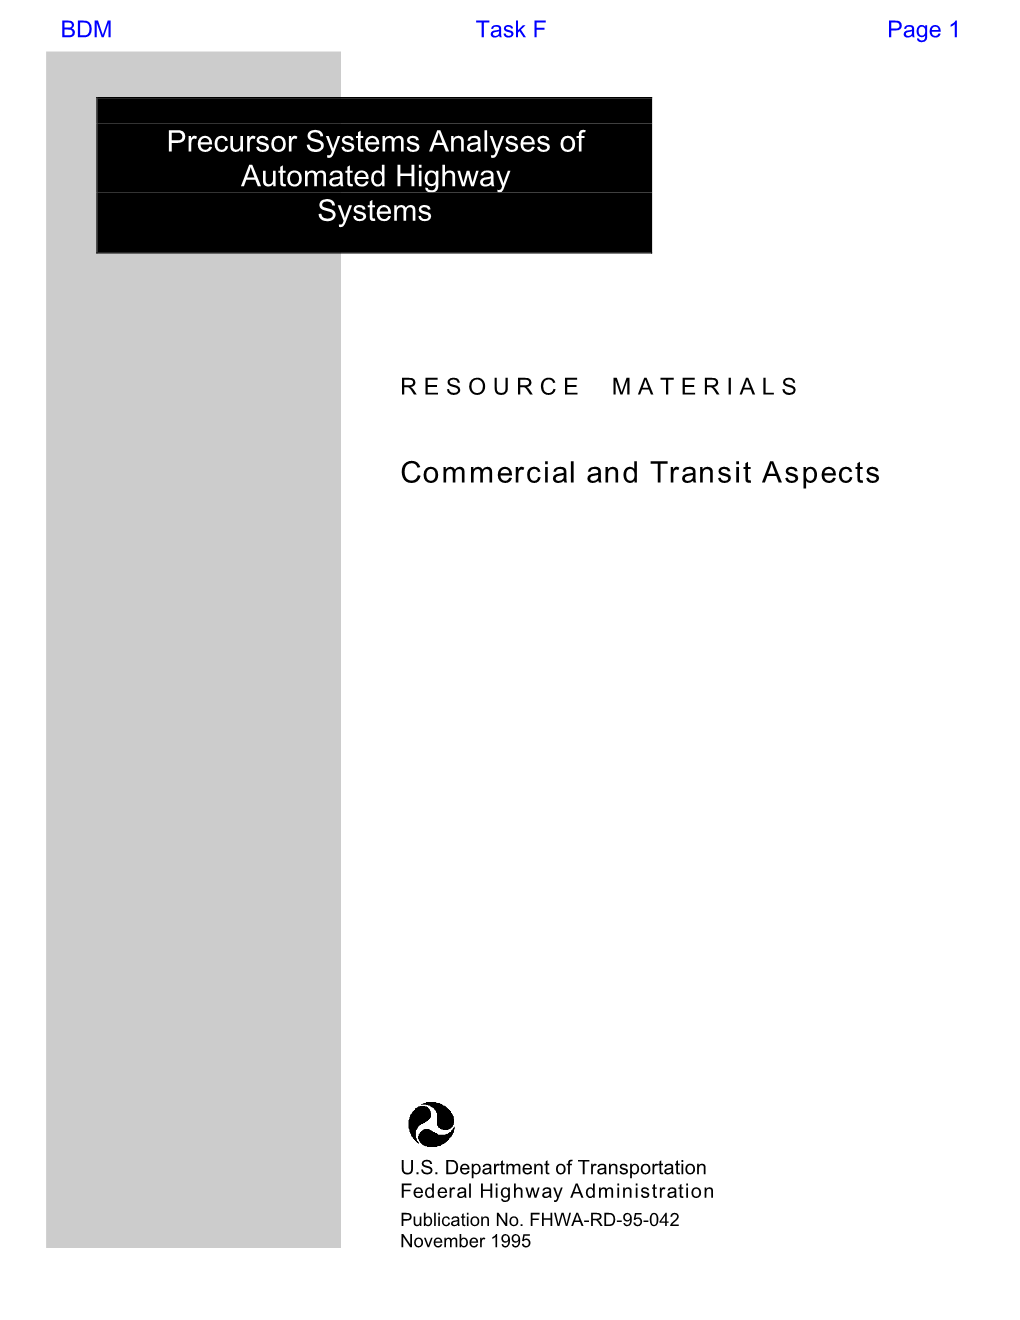 Commercial and Transit Aspects